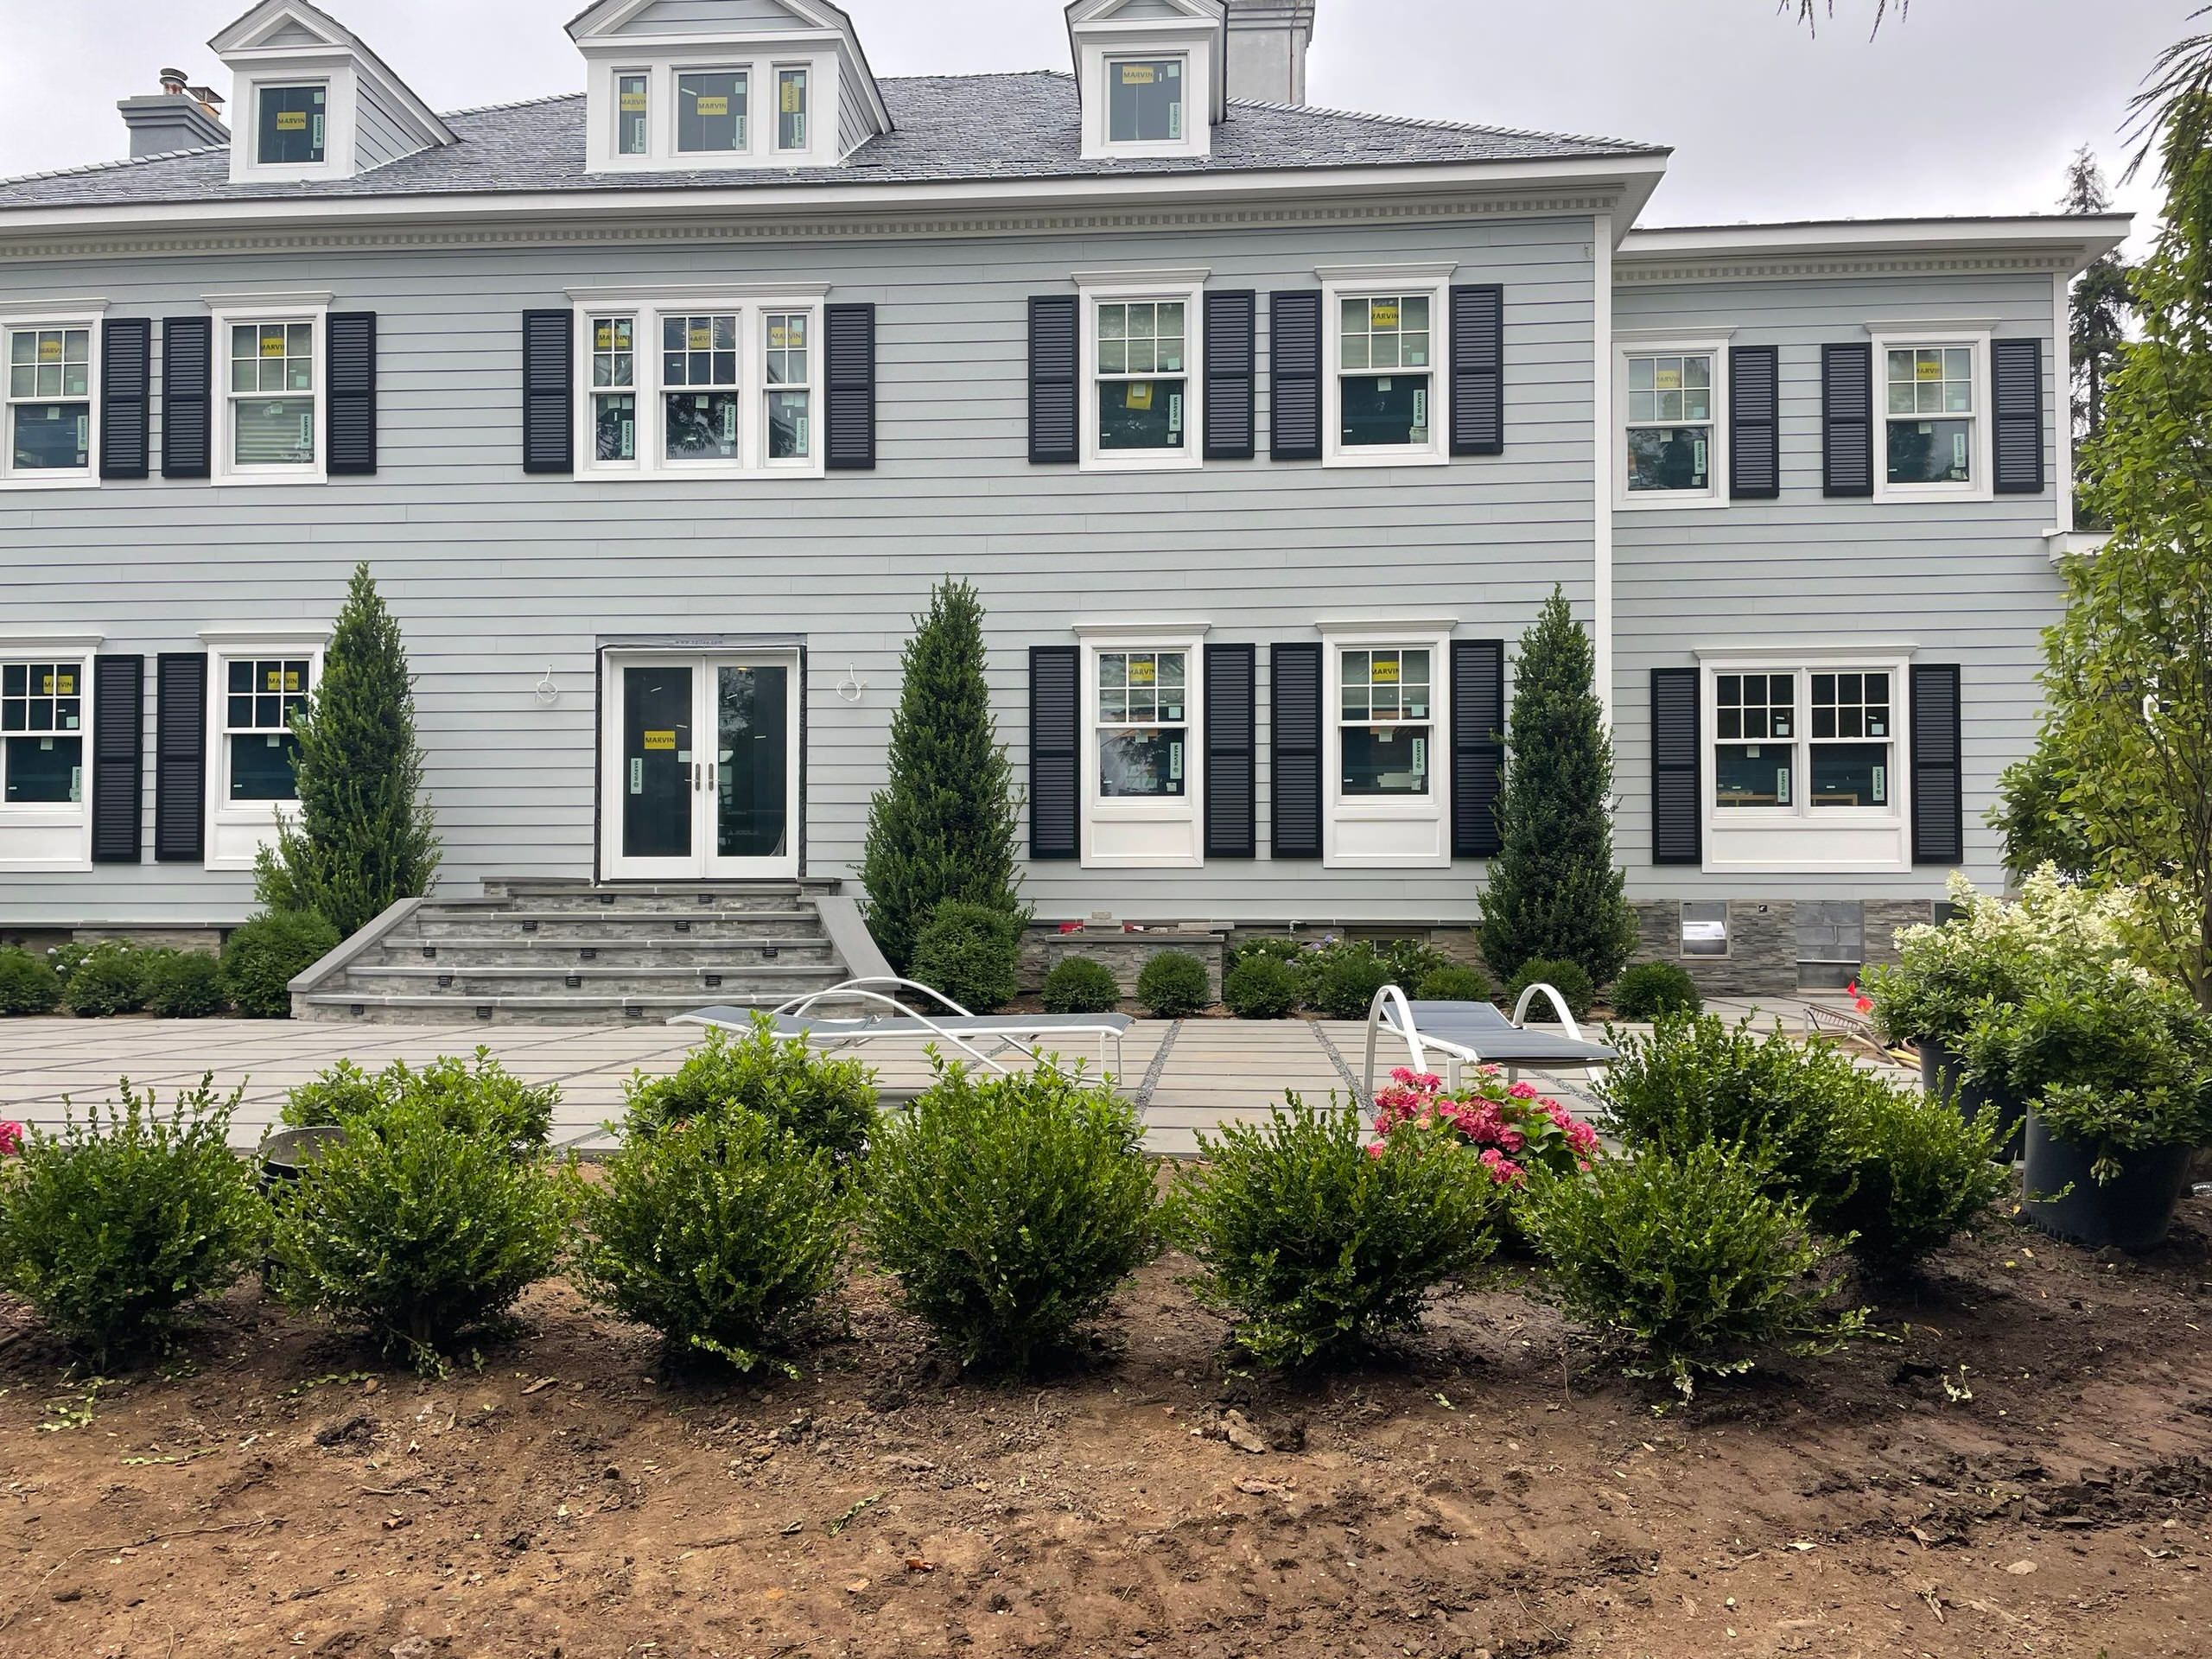 Doing Landscaping Large in Woodsburgh NY!